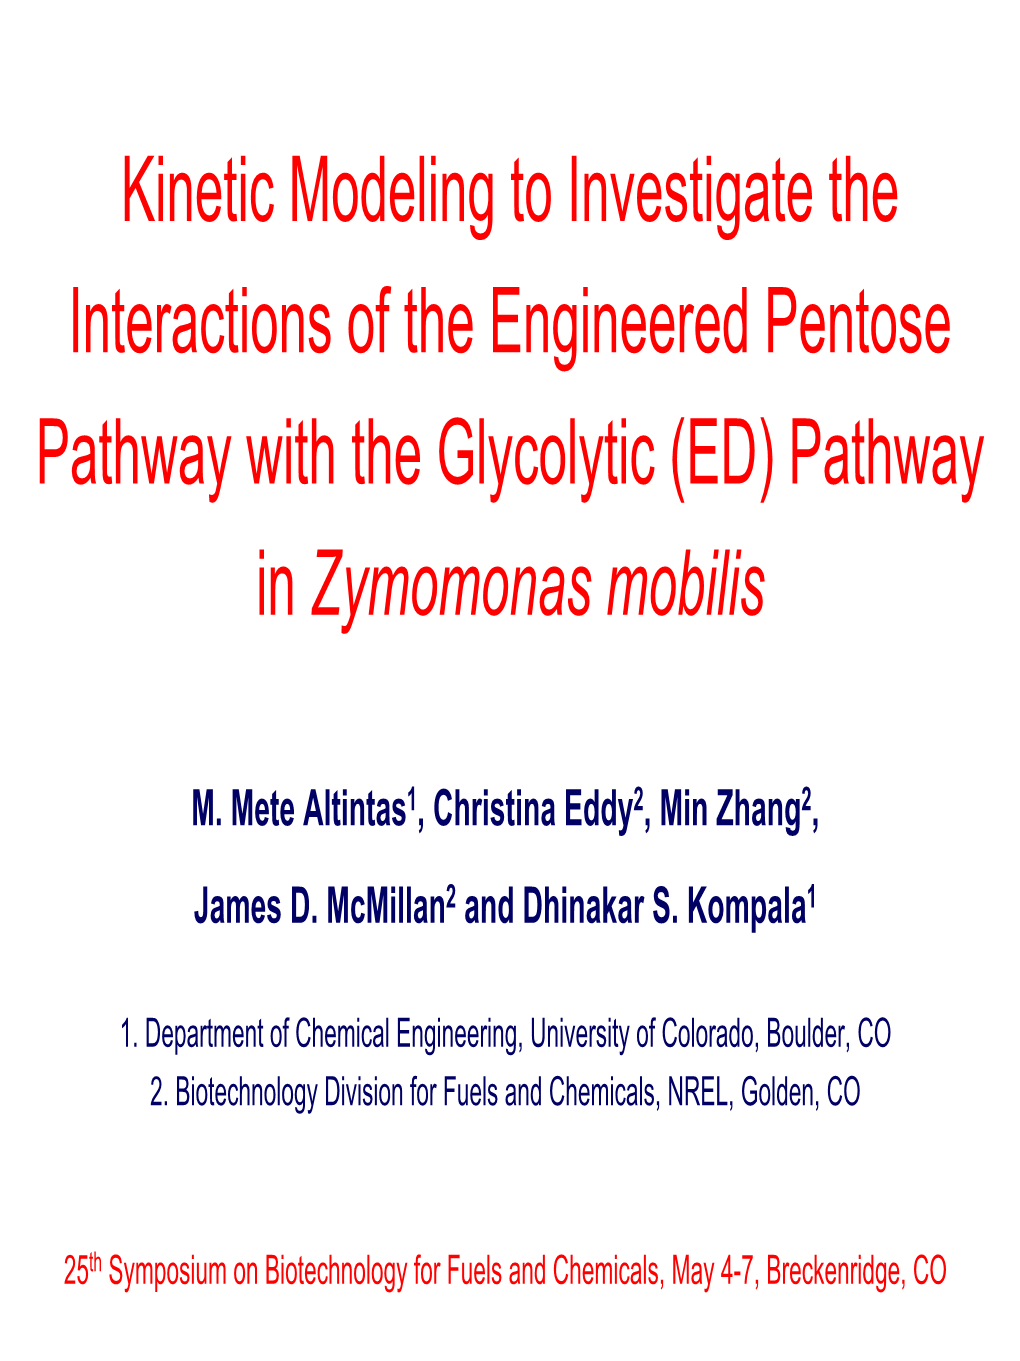 Kinetic Modeling to Investigate the Interactions of the Engineered Pentose Pathway with the Glycolytic (ED) Pathway in Zymomonas Mobilis